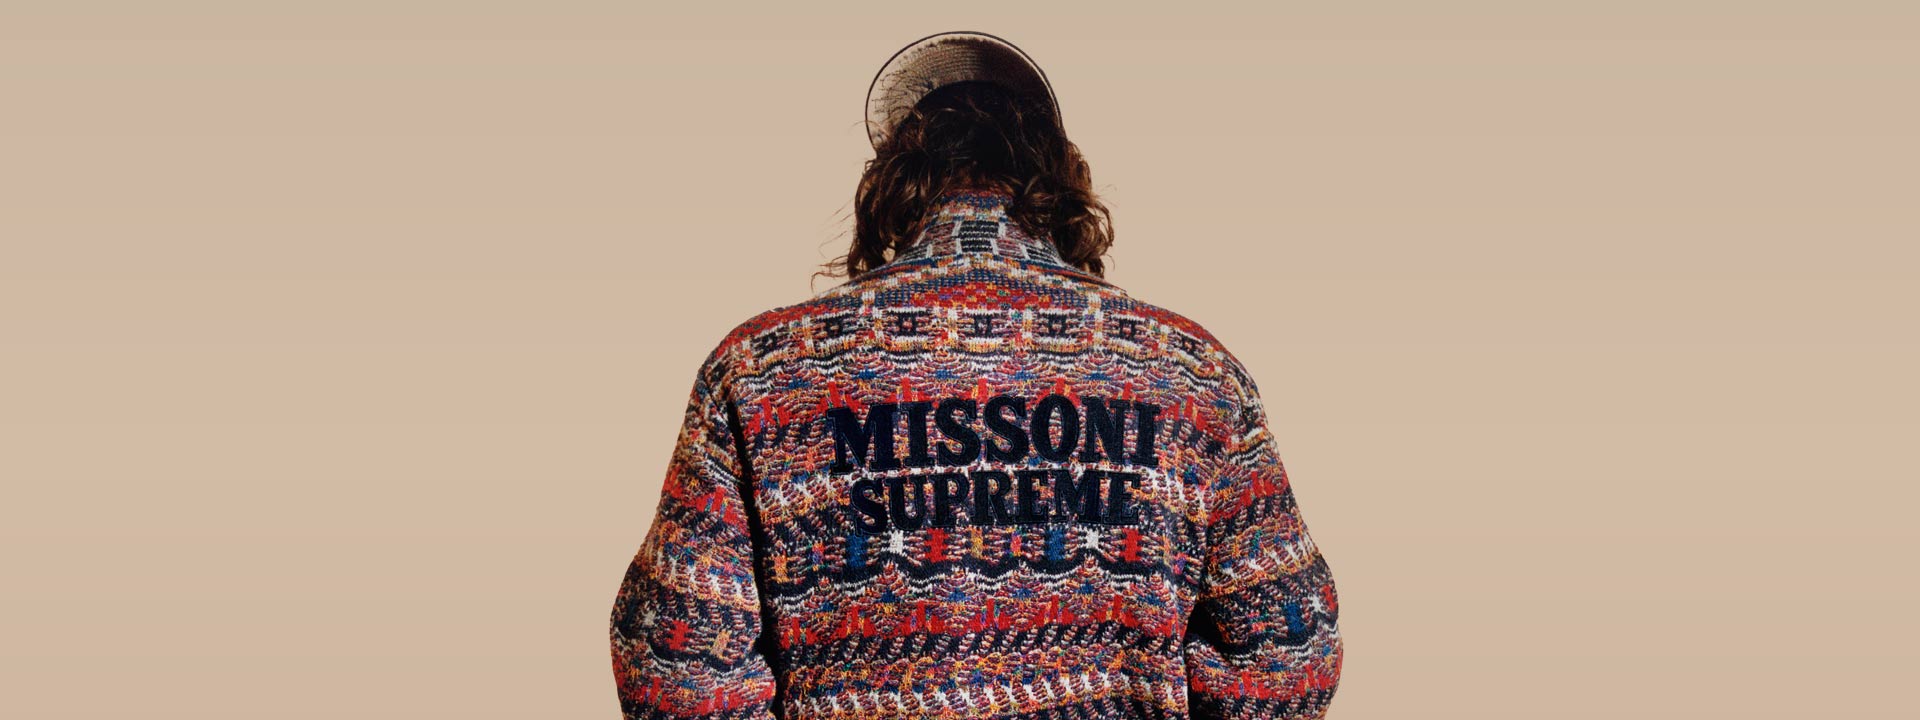 The model wears jacket and hat, from the new Supreme X Missoni Collaboration